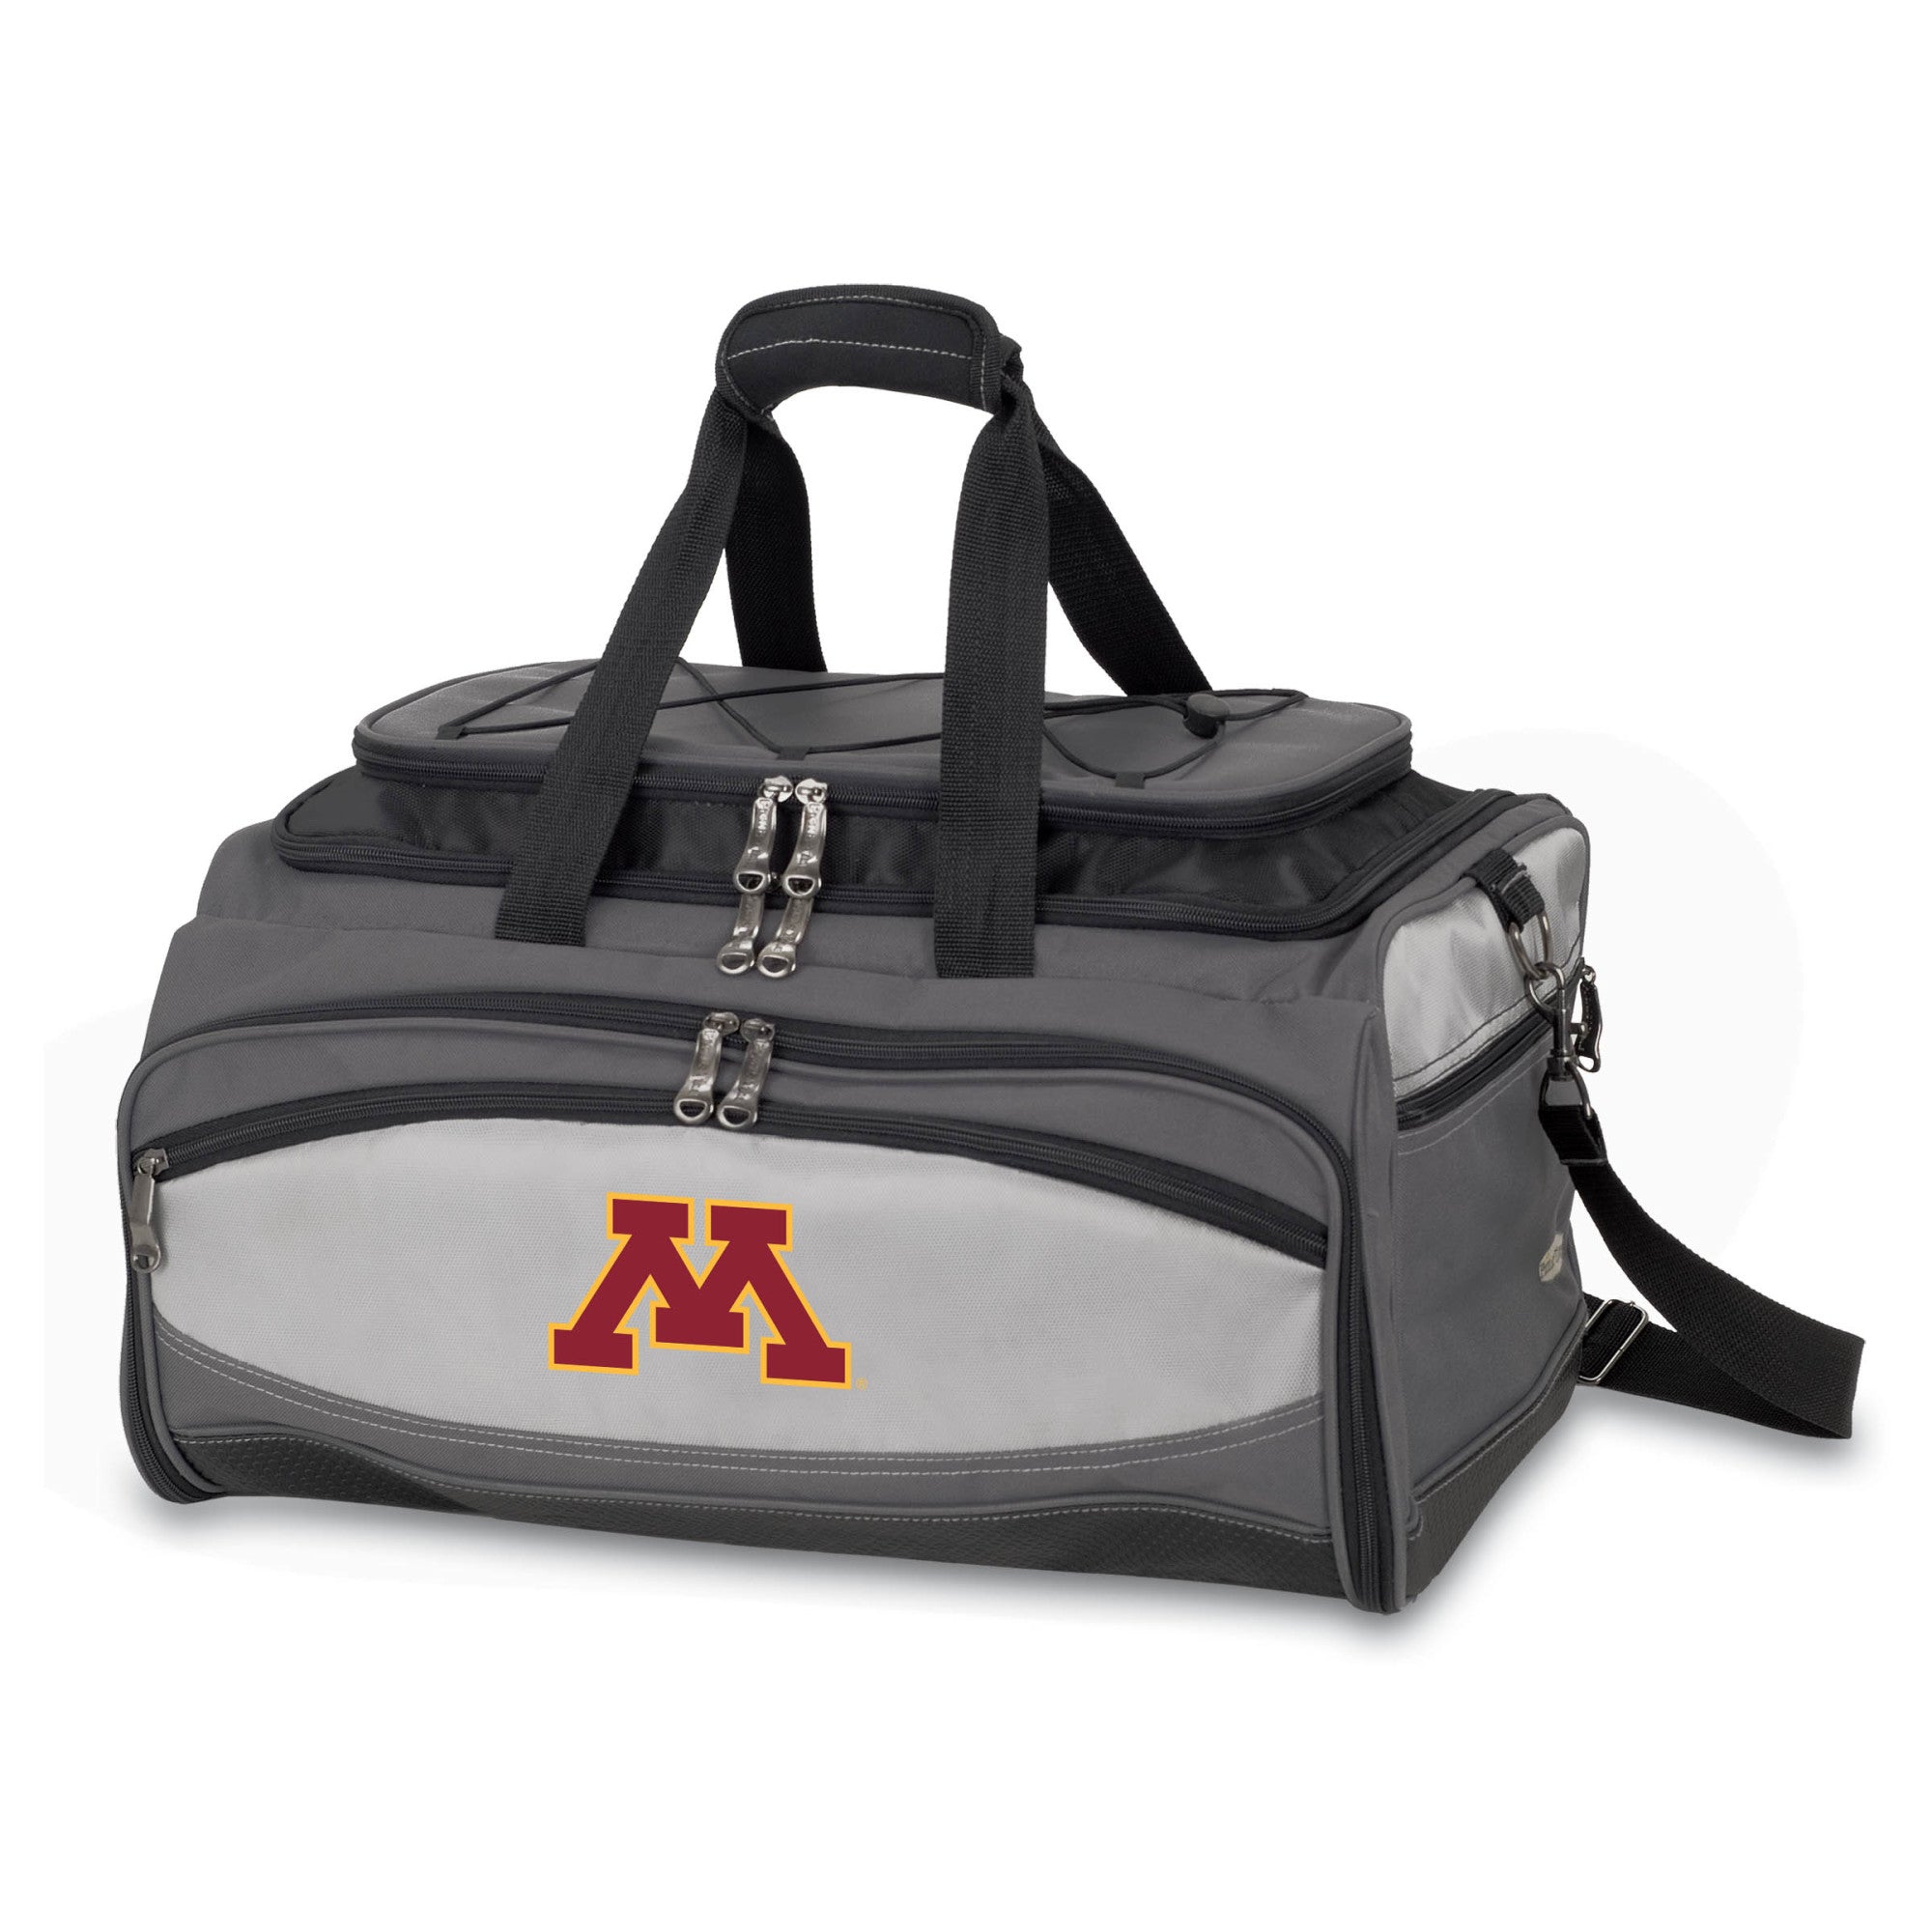 Minnesota Golden Gophers - Buccaneer Portable Charcoal Grill & Cooler Tote